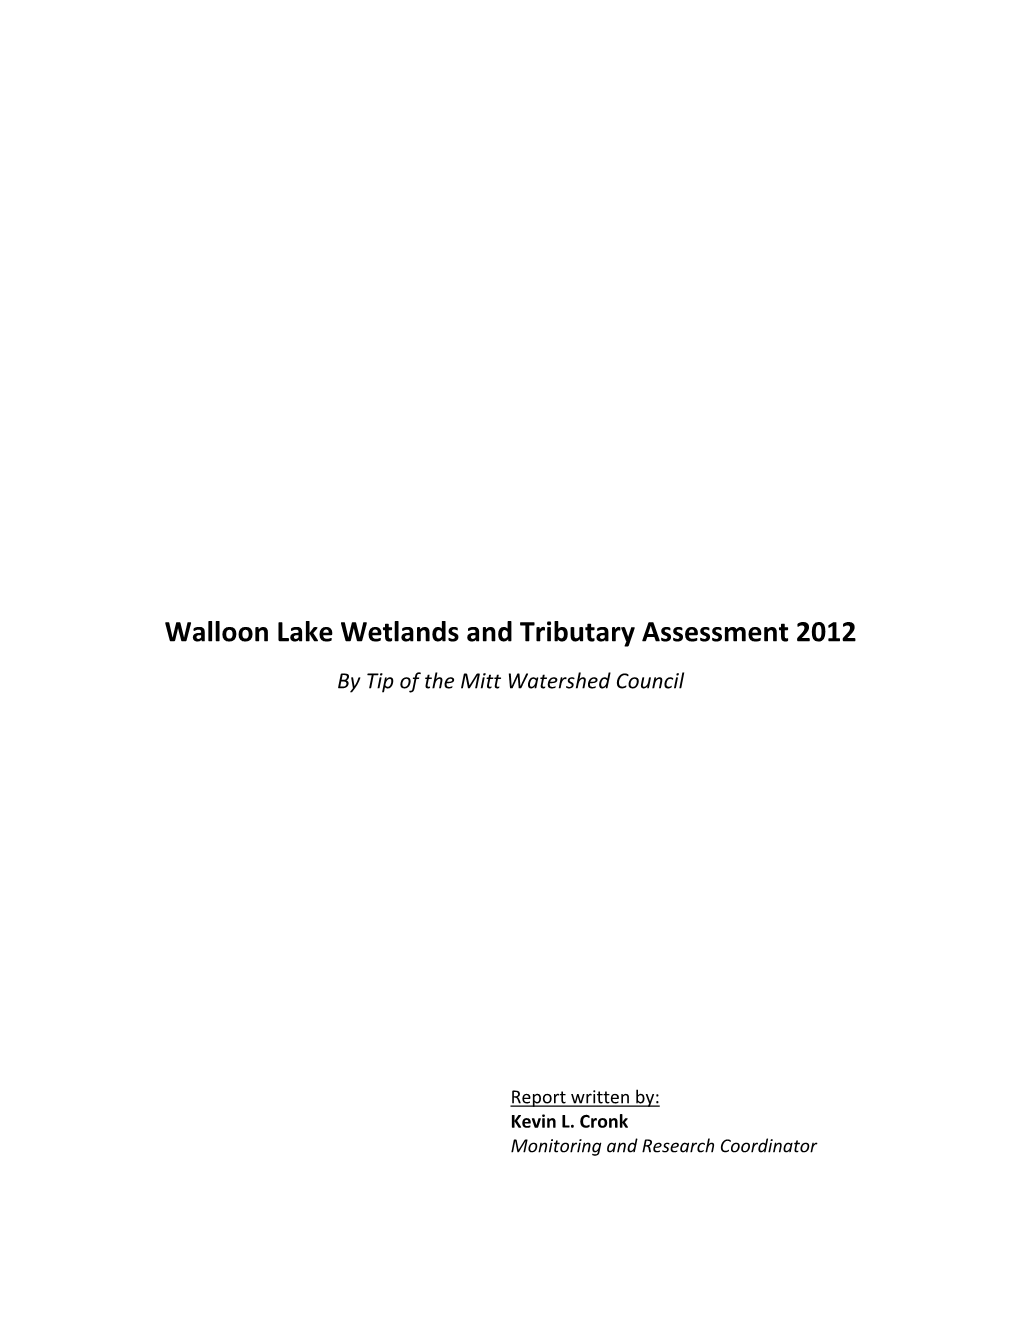 Walloon Lake Wetlands and Tributary Assessment 2012 by Tip of the Mitt Watershed Council